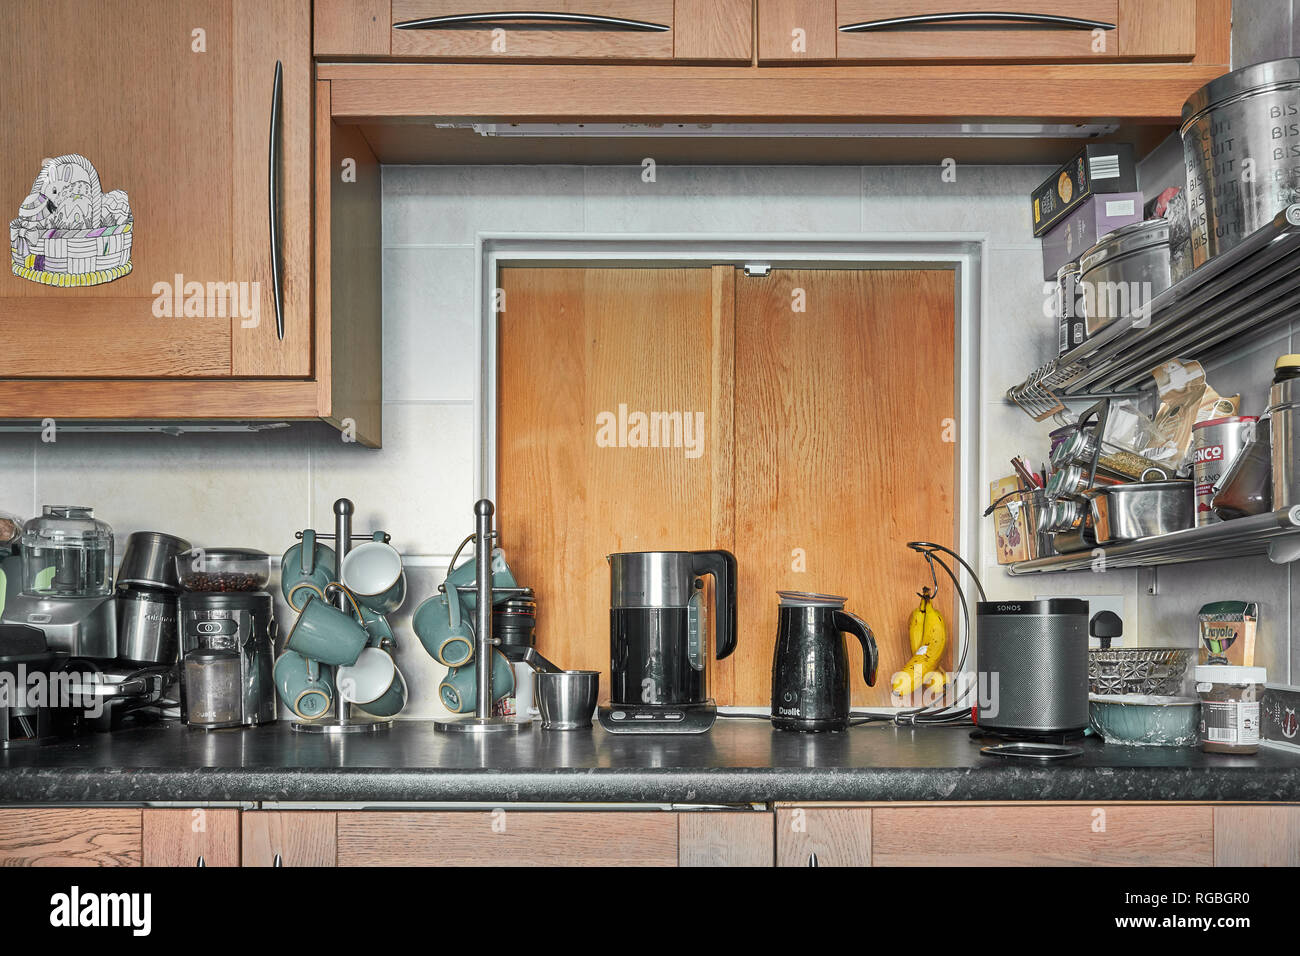 A Sonos speaker, cups, a kettle, a coffee grinder, a milk frother and other kitchen equipment on a cluttered work top in front of a oak hatch Stock Photo